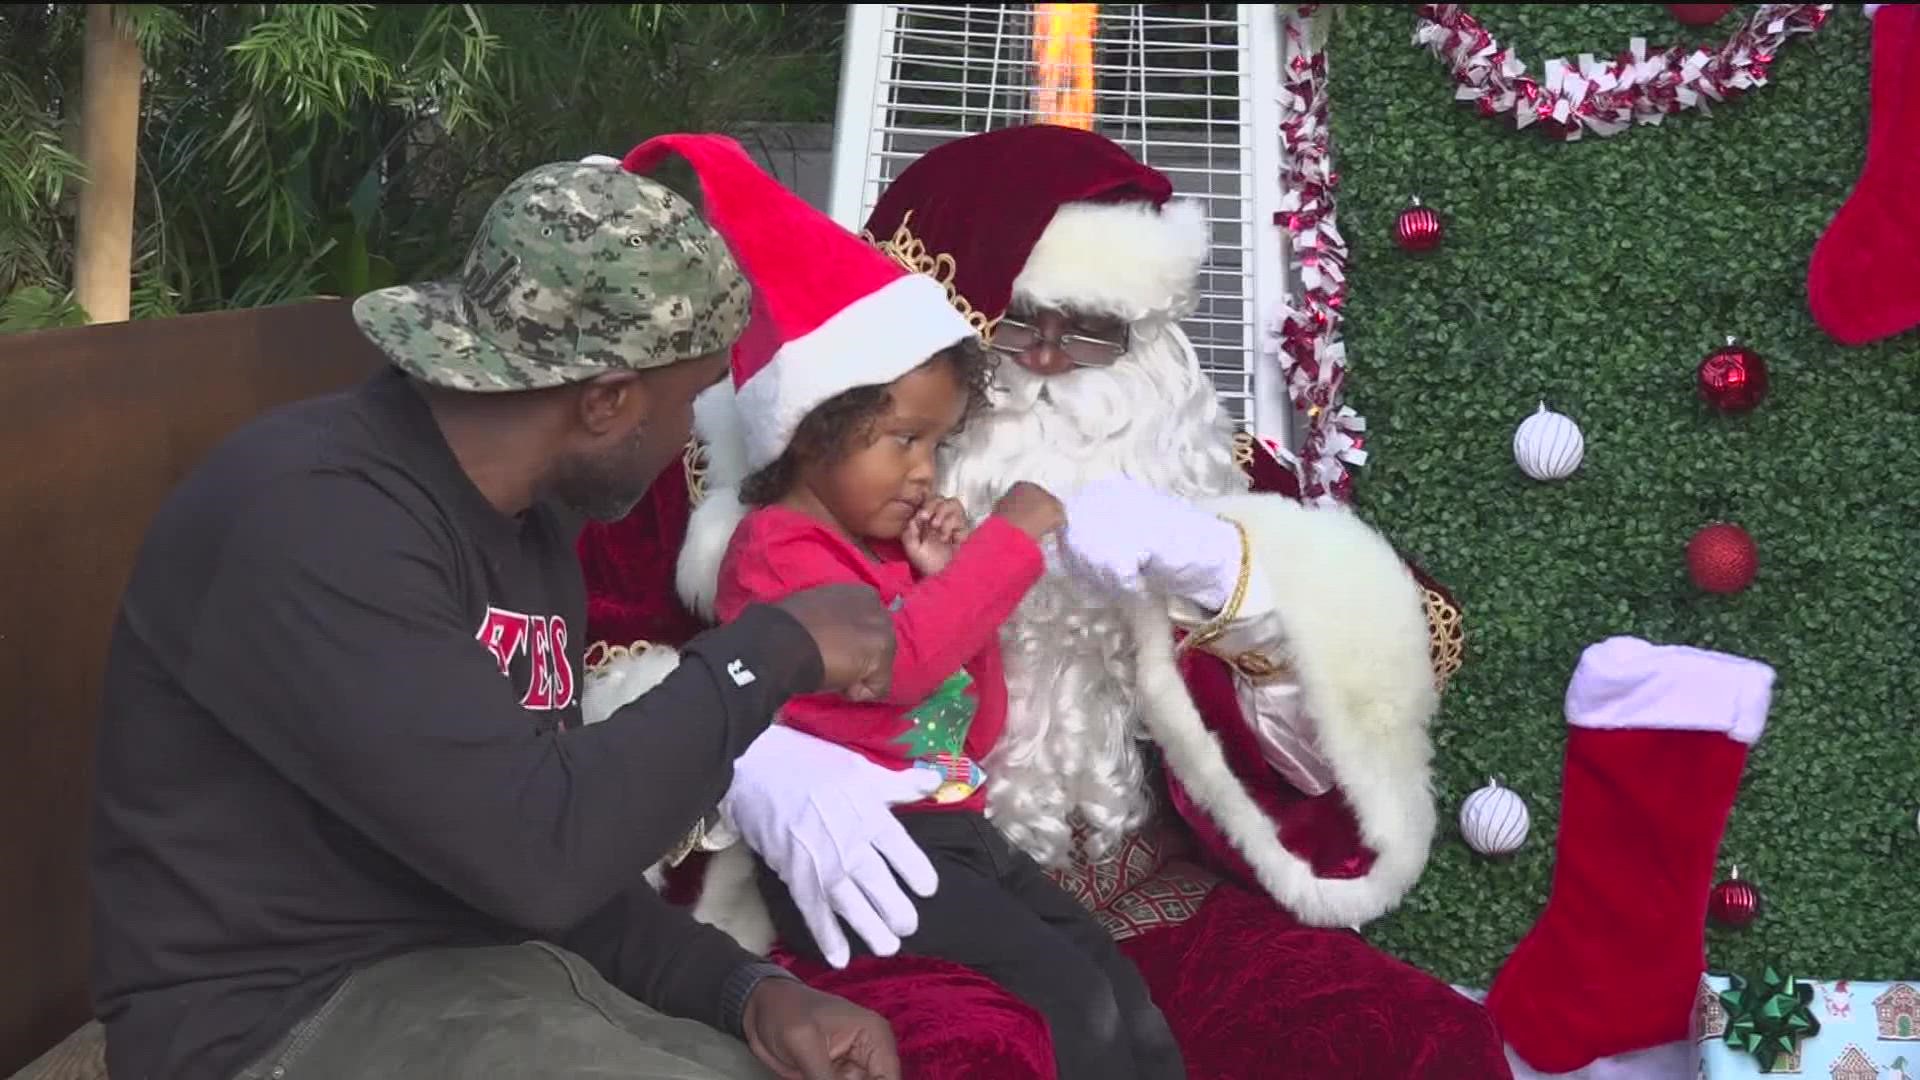 For many kids, seeing a Santa that looks like them makes the holiday even more magical. Kenneth White, The Black Santa, is spreading joy across San Diego County.